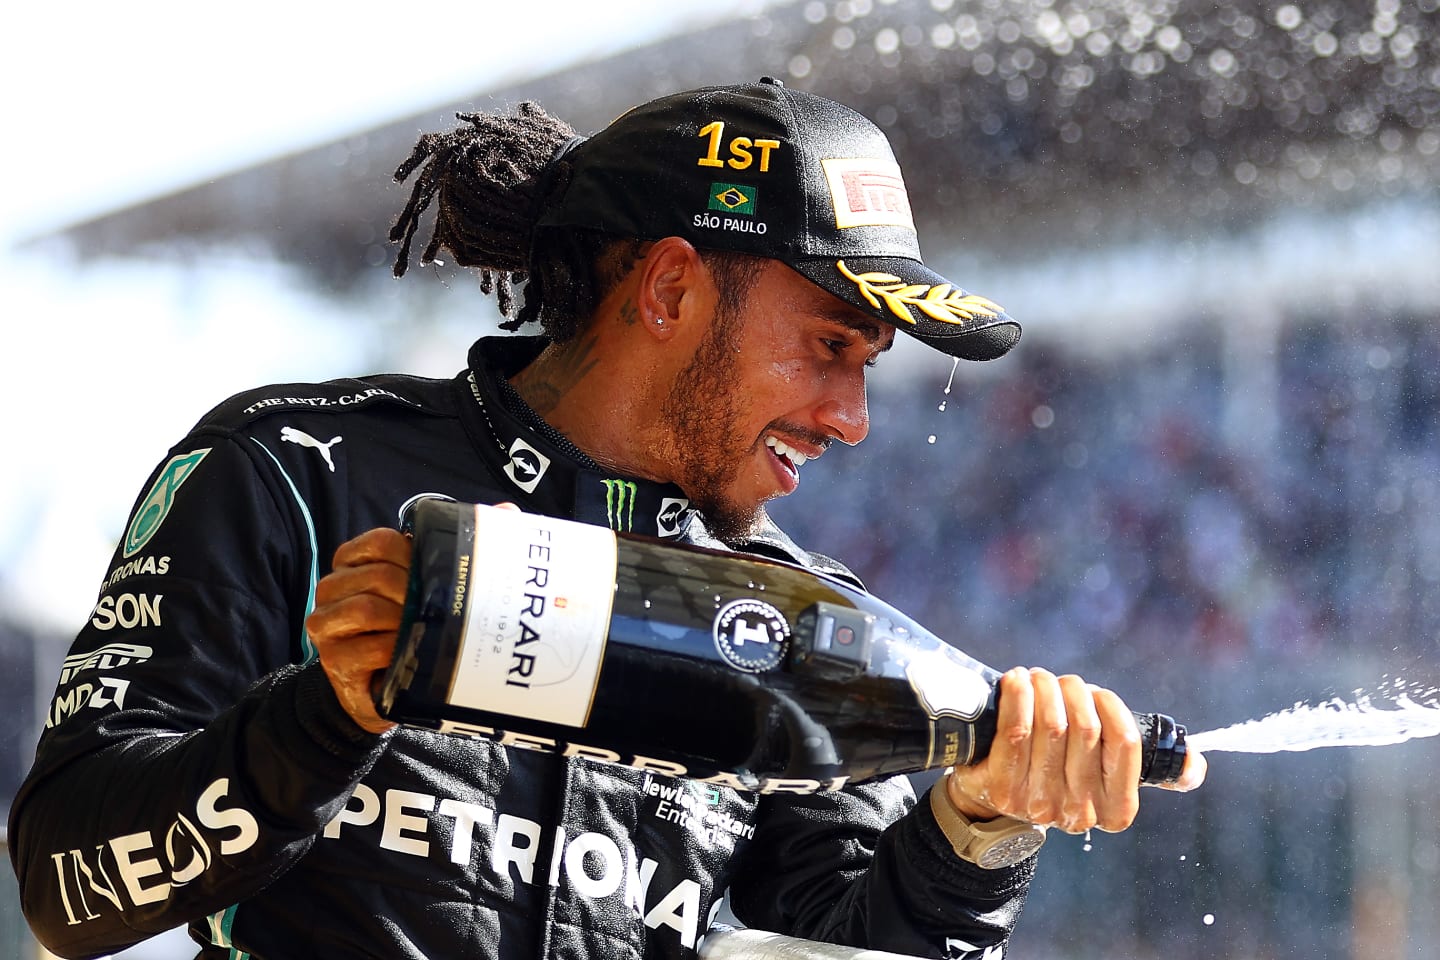 SAO PAULO, BRAZIL - NOVEMBER 14: Race winner Lewis Hamilton of Great Britain and Mercedes GP celebrates on the podium with sparkling wine during the F1 Grand Prix of Brazil at Autodromo Jose Carlos Pace on November 14, 2021 in Sao Paulo, Brazil. (Photo by Bryn Lennon - Formula 1/Formula 1 via Getty Images)